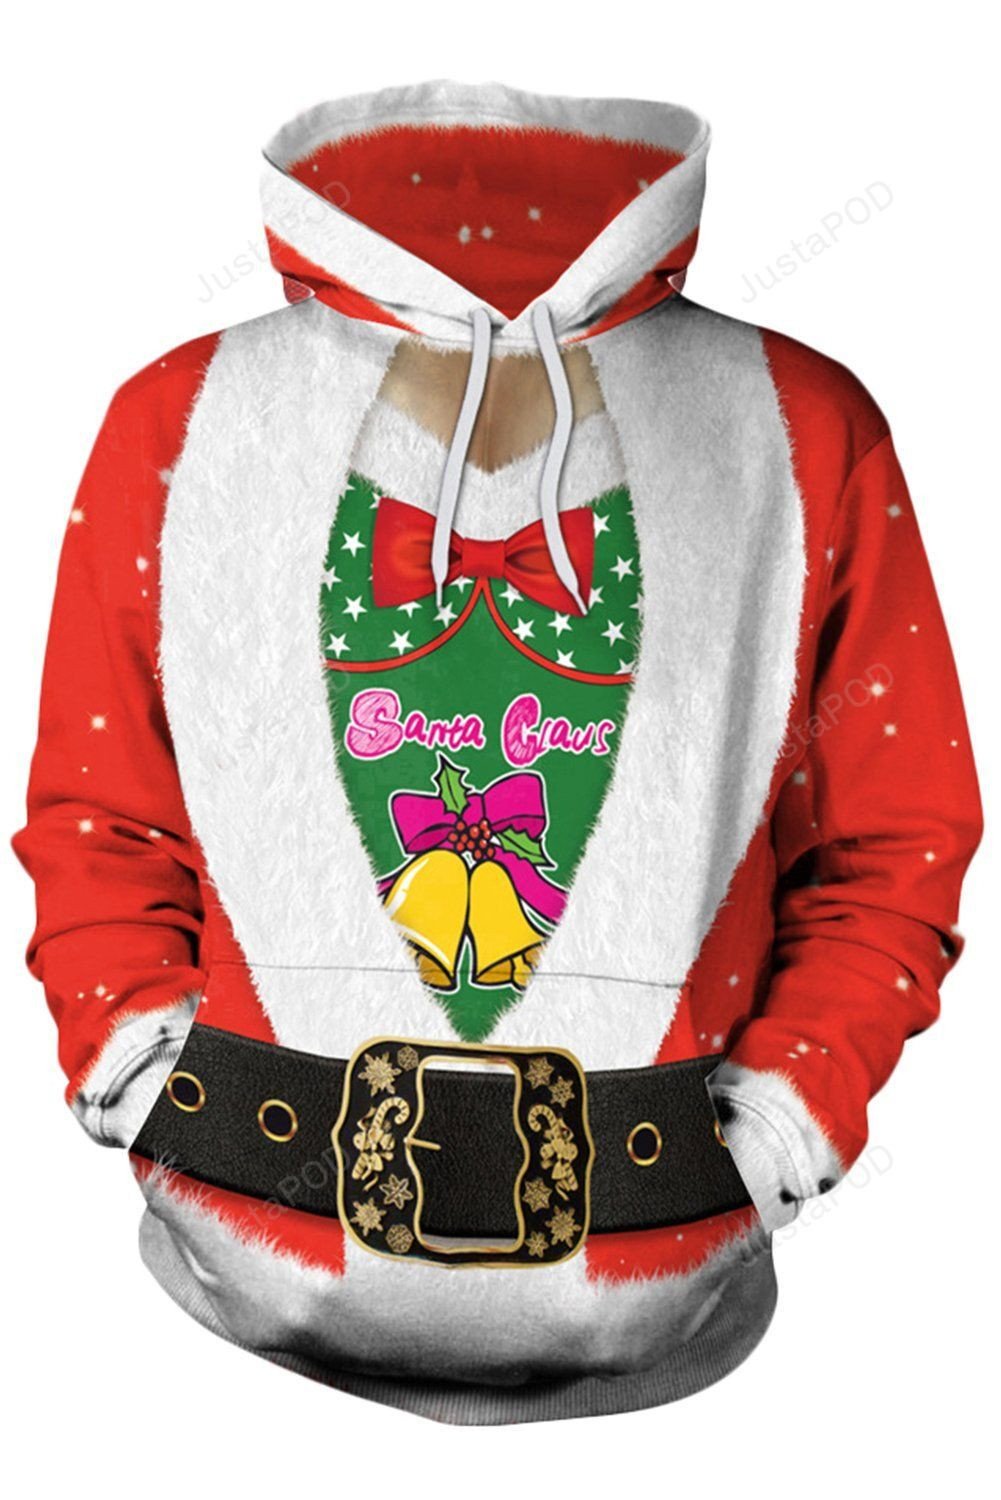 Christmas Sweatshirt Xmas Santa Print 3D Hoodie For Men Women All Over 3D Printed Hoodies Pullover With Pouch Pockets